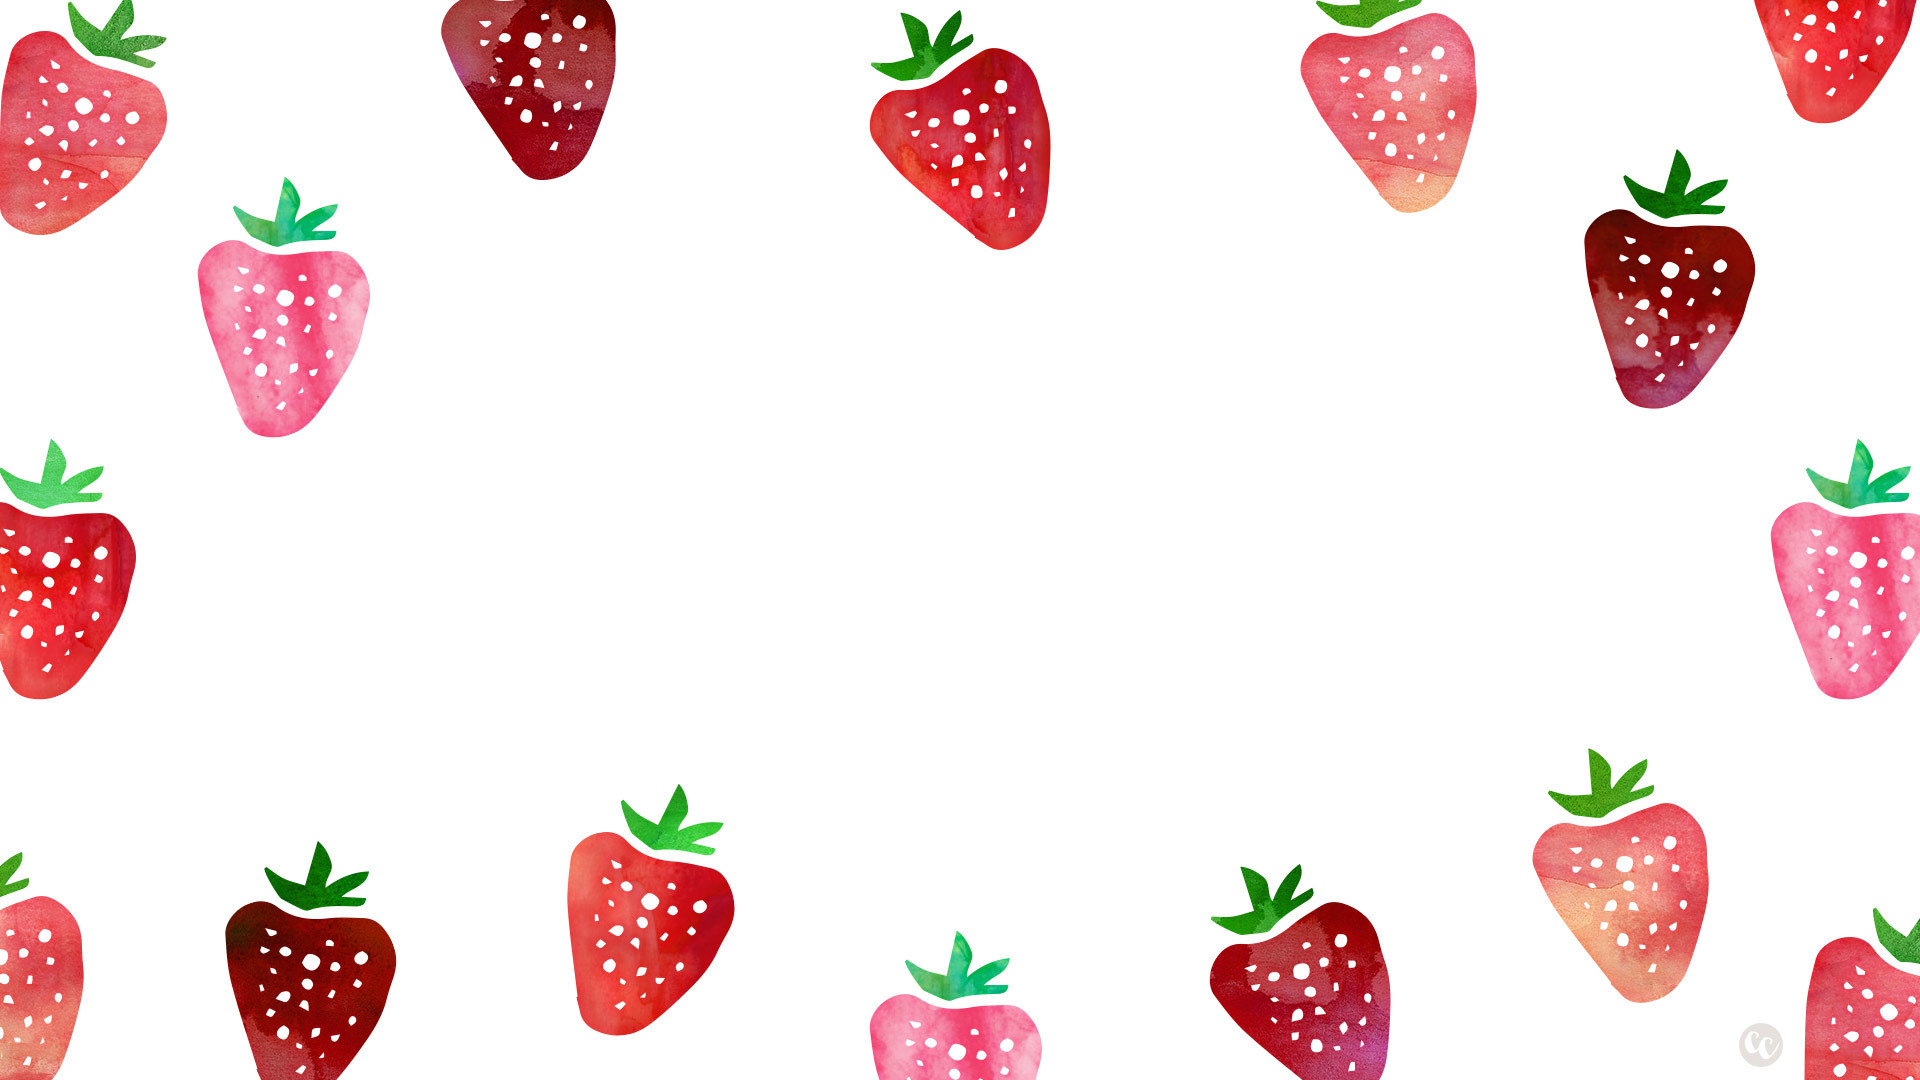 Strawberry Backgrounds posted by Ryan Tremblay.